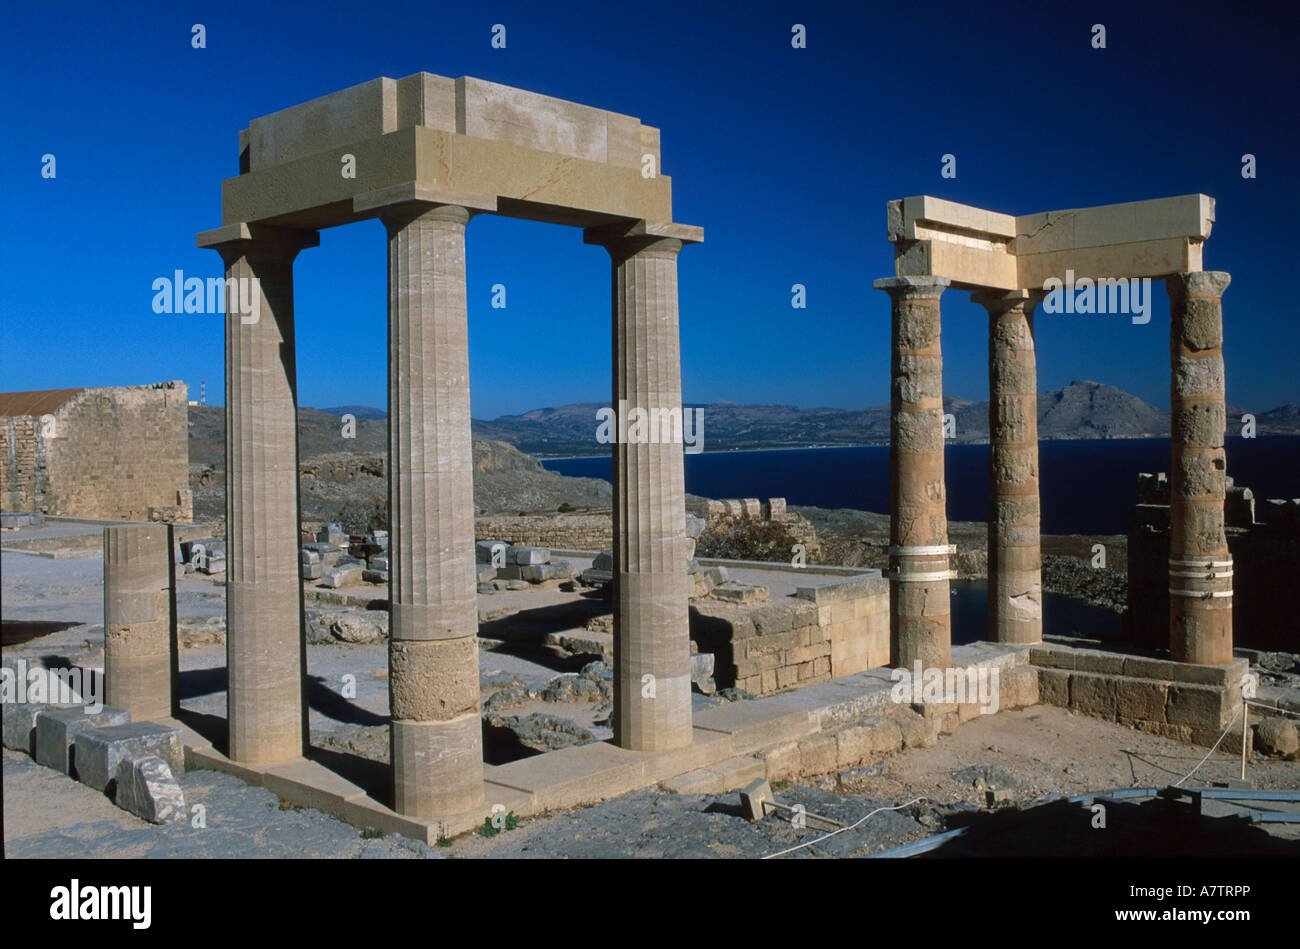 Old ruins of building under clear blue sky, Dodecanese Islands, Greece Stock Photo